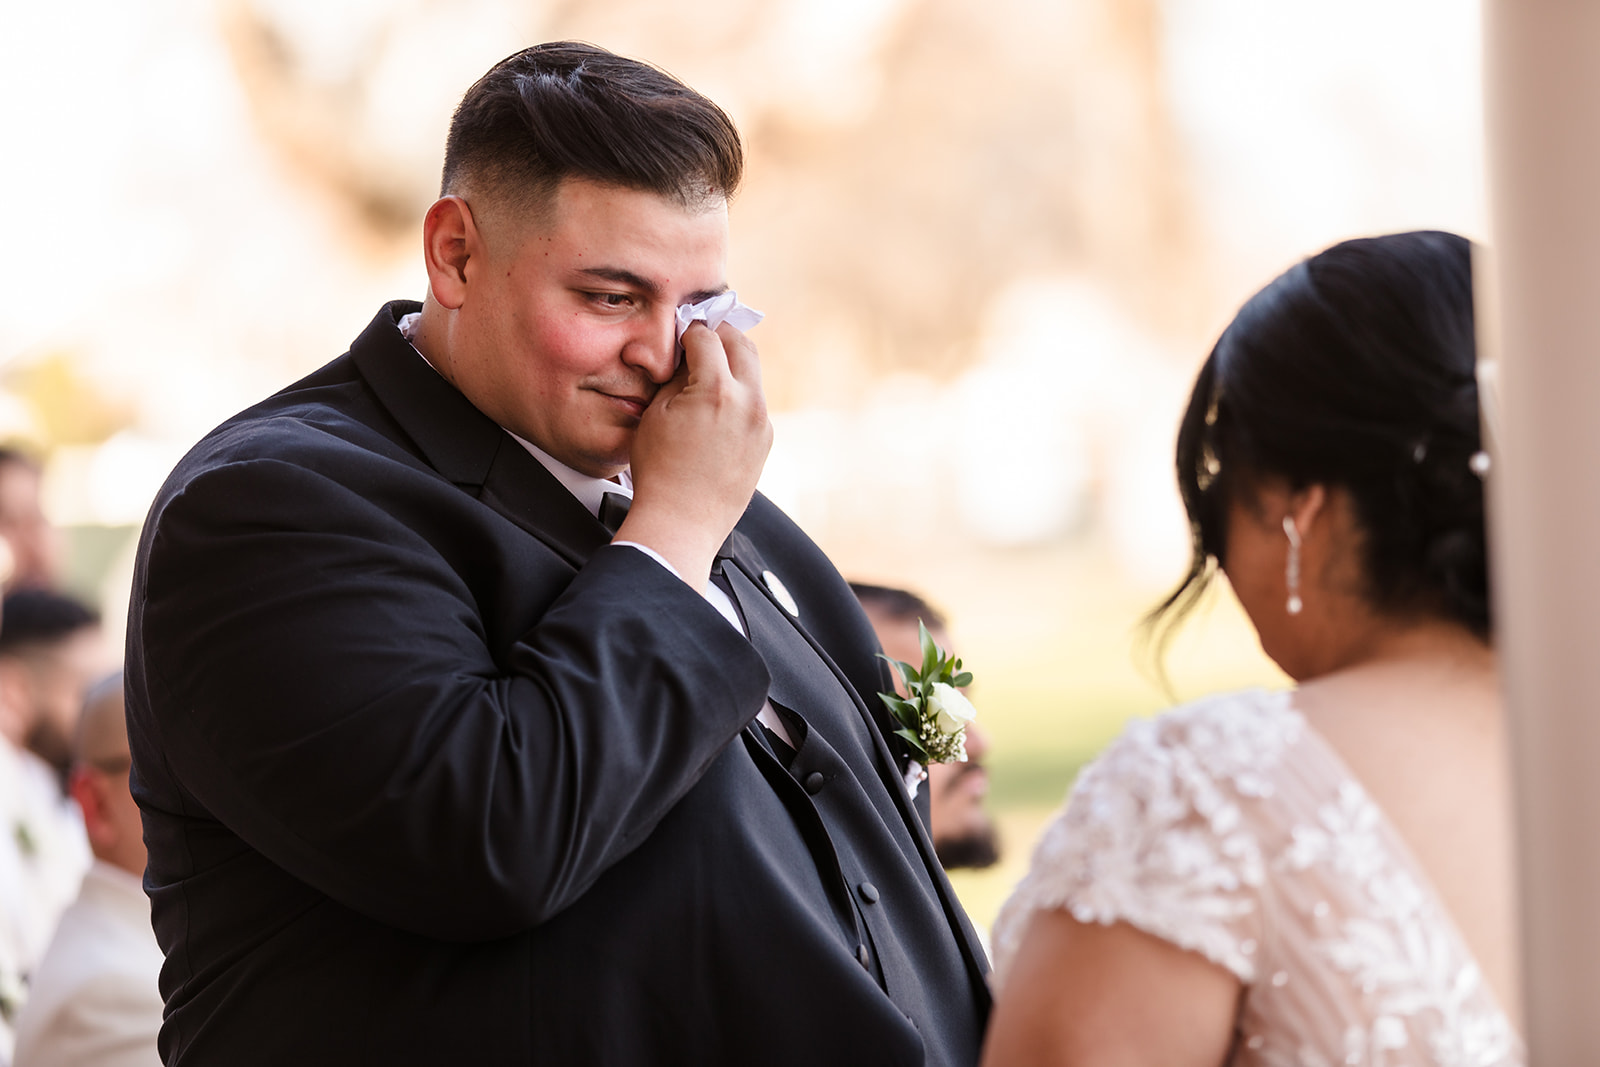 Groom wipes away a tear during the ceremony